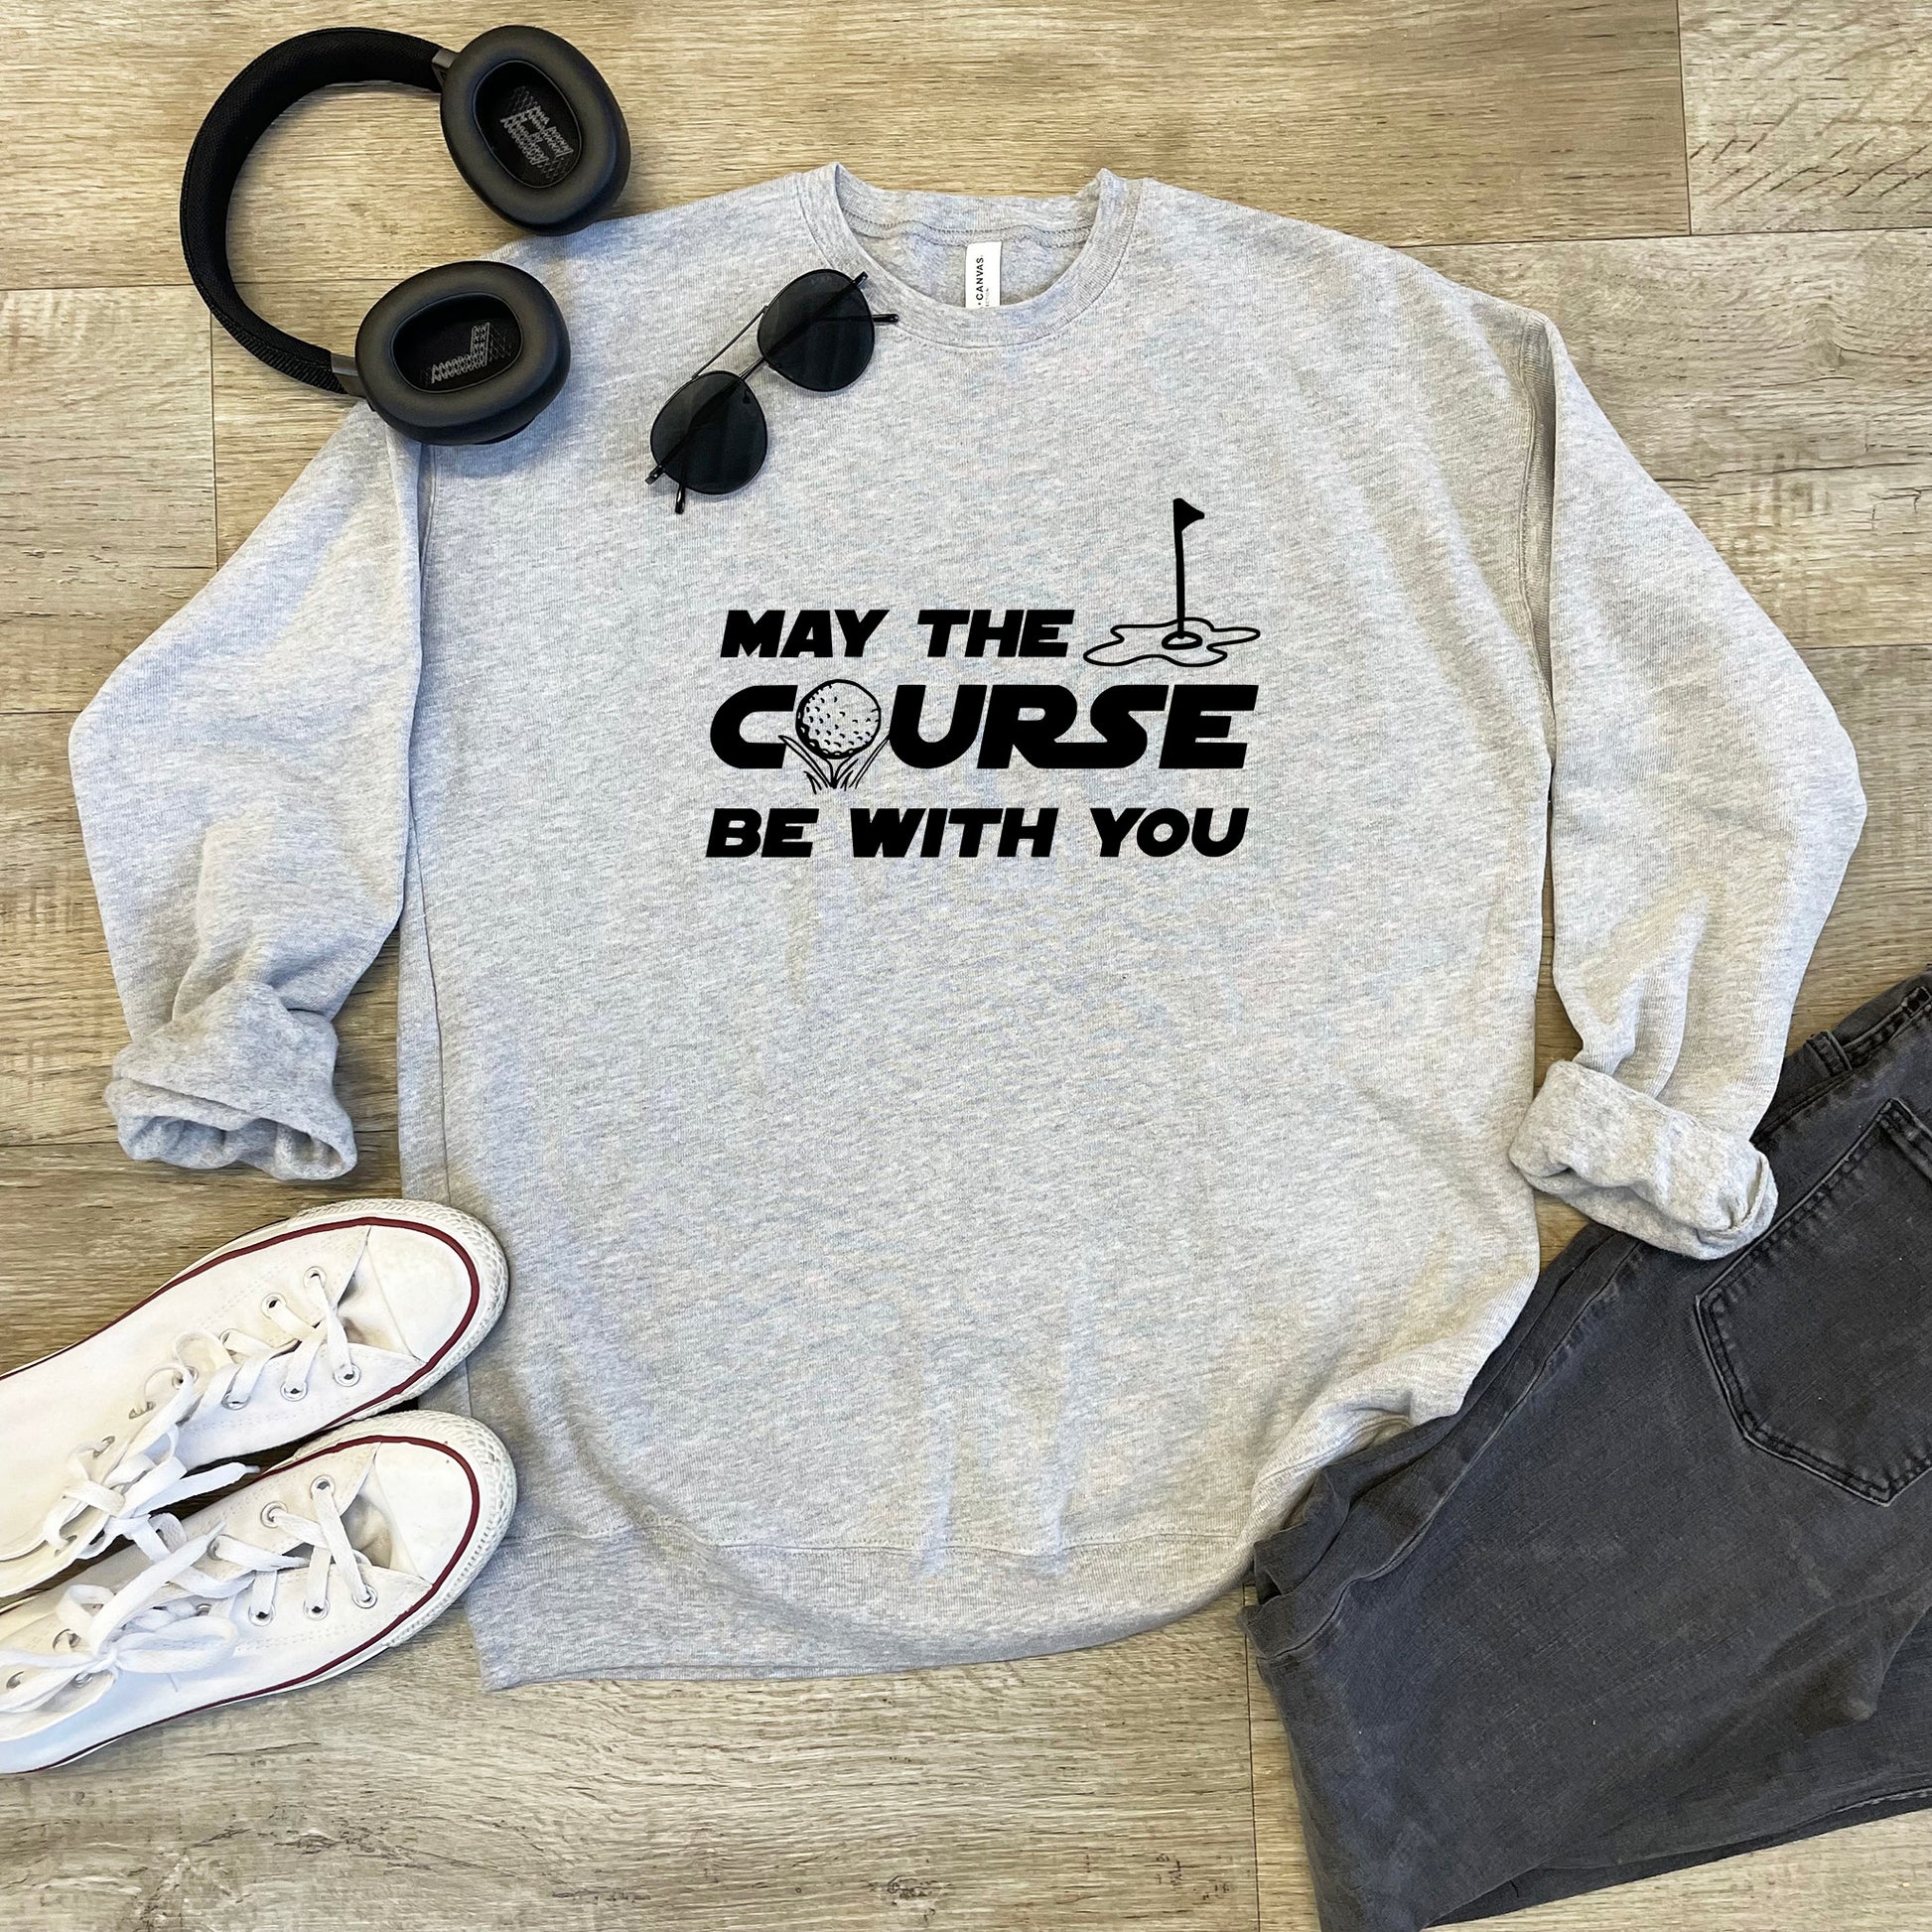 a sweatshirt that says may the course be with you